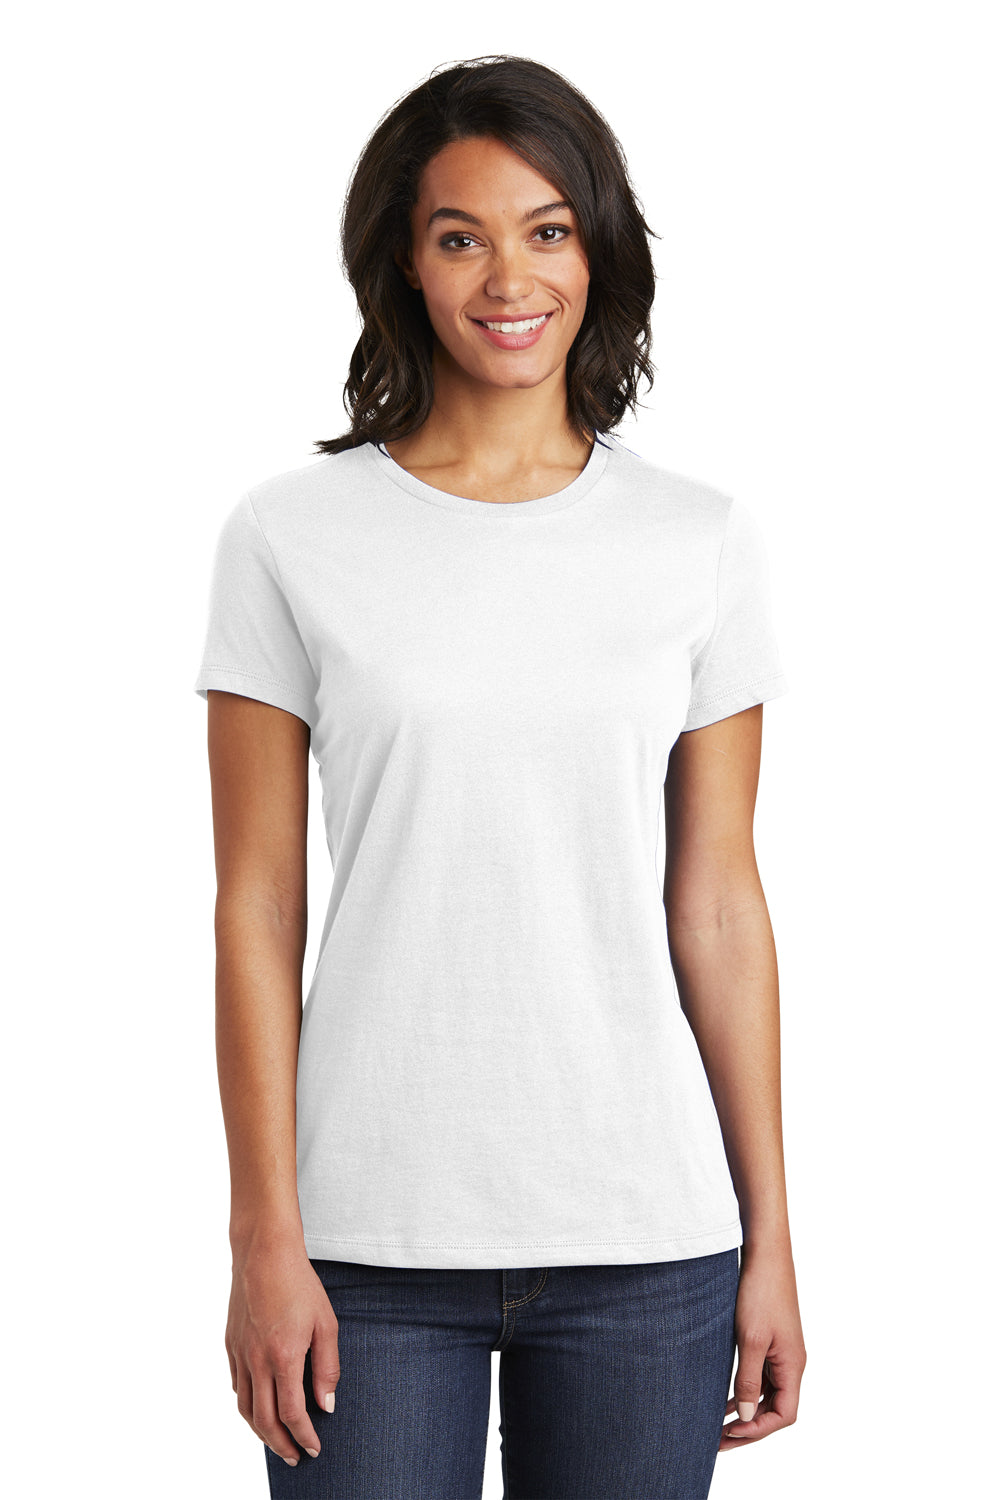 District DT6002 Womens Very Important Short Sleeve Crewneck T-Shirt White Front